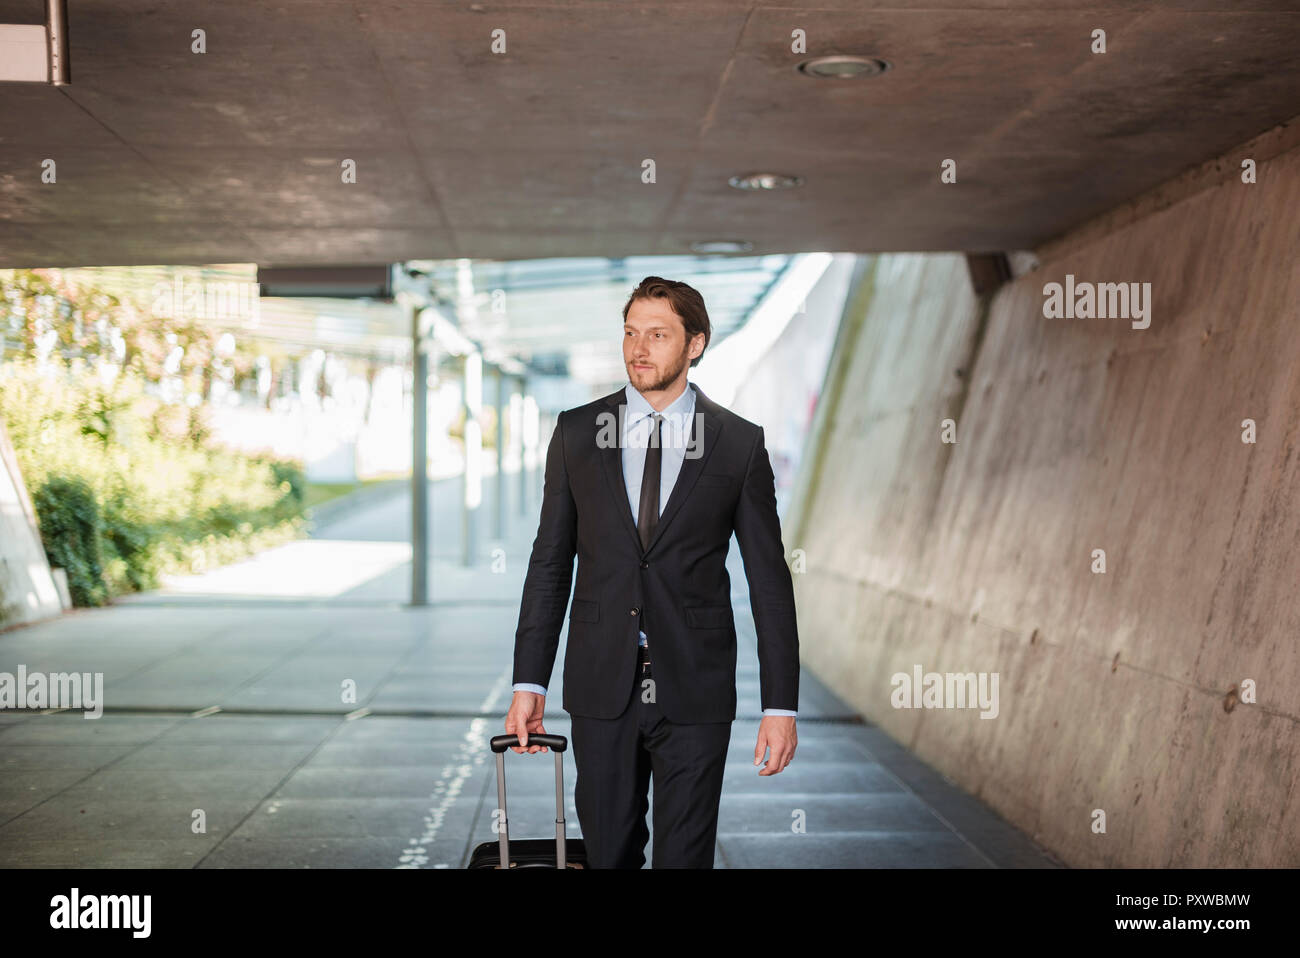 Businessman with rolling suitcase walking in tunnel Banque D'Images